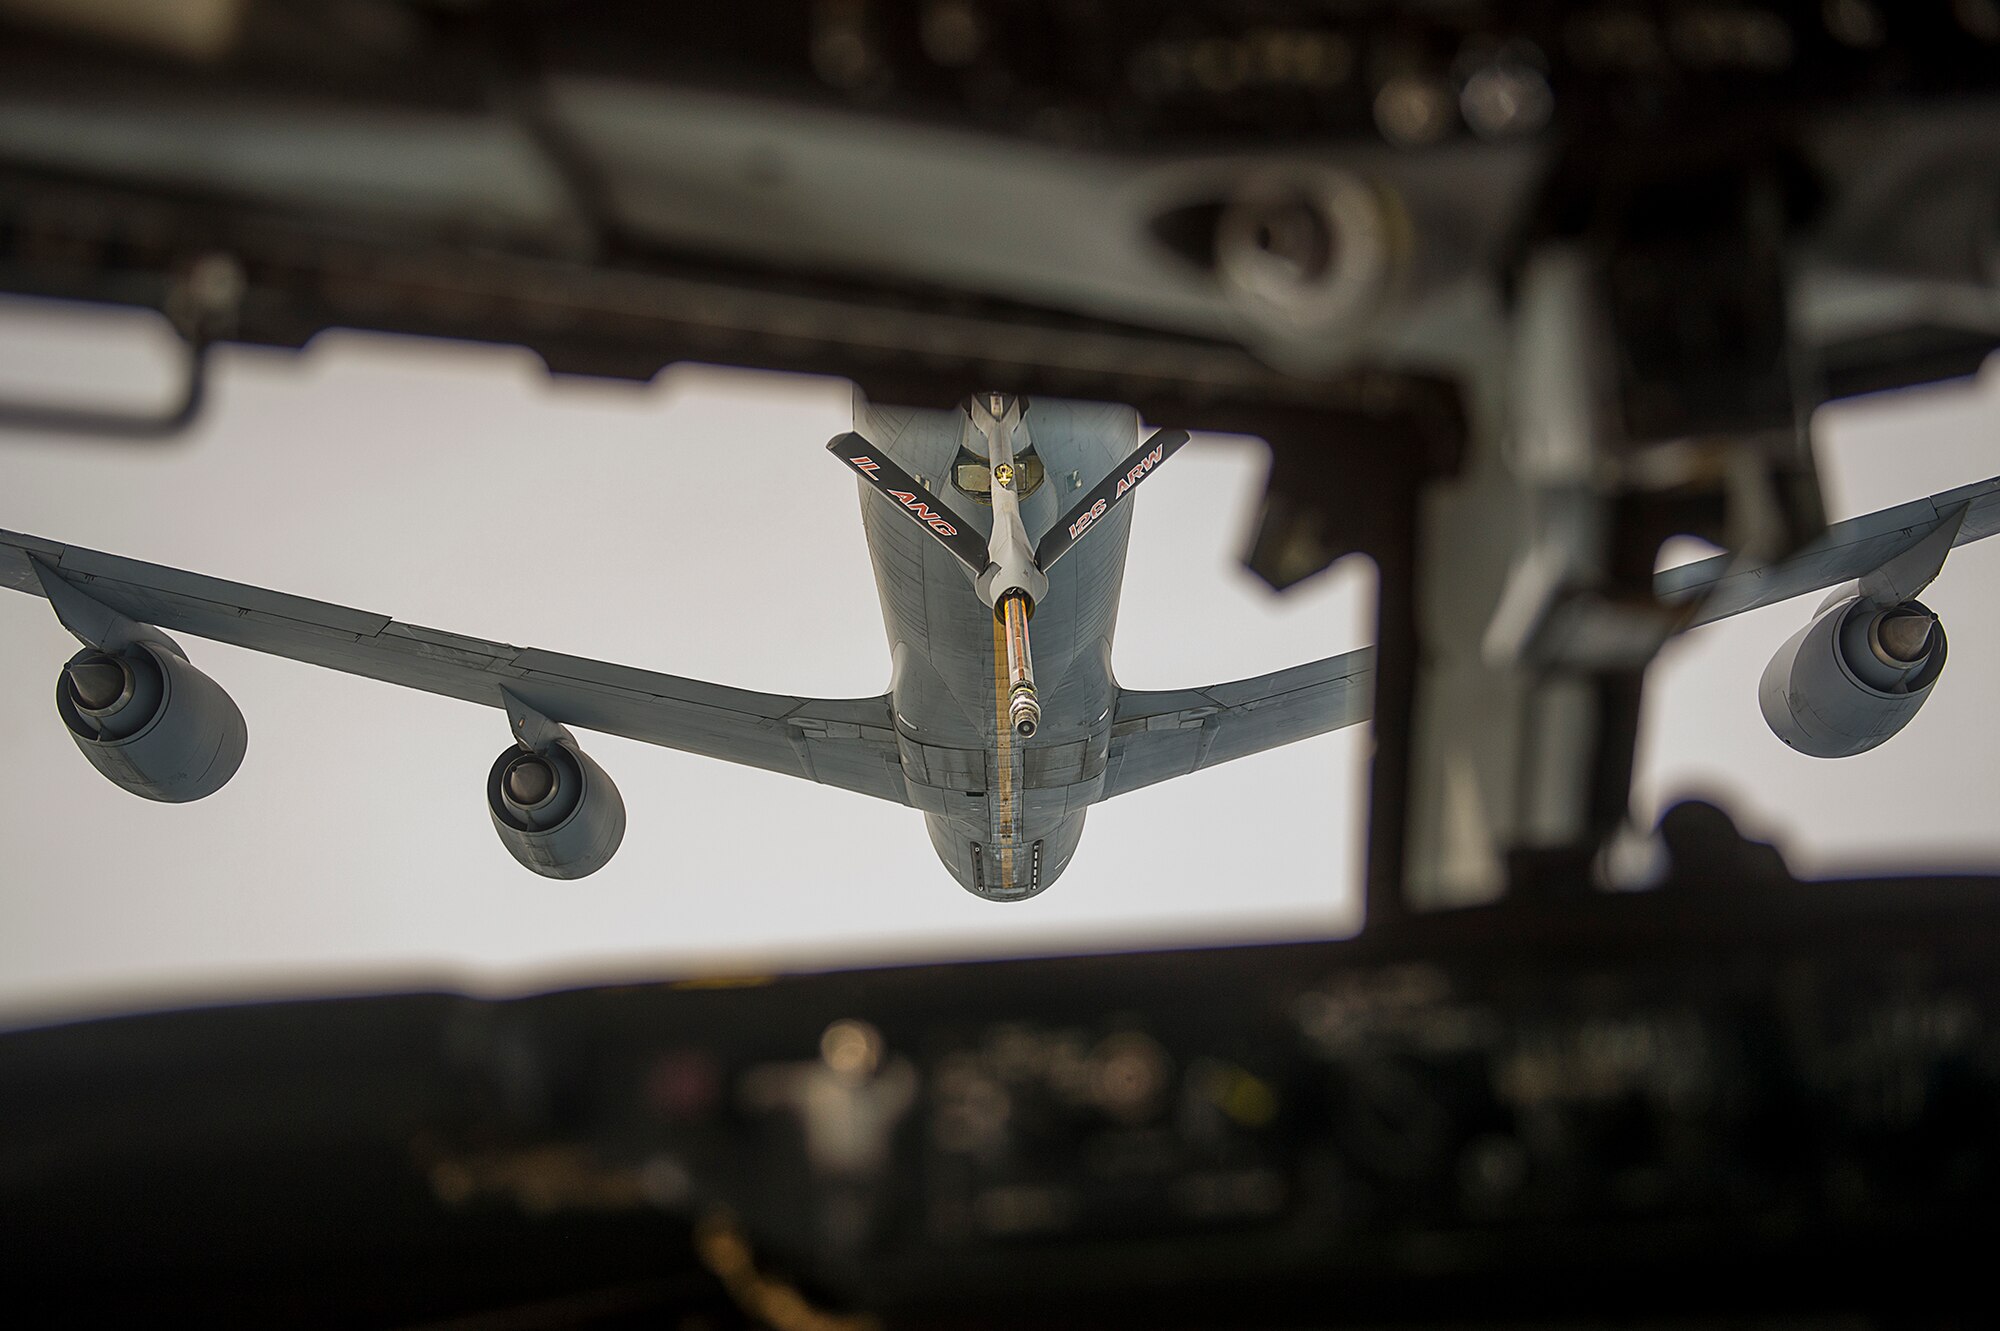 A U.S. Air Force KC-10 Extender flies into position so that an E-3 Sentry, Airborne Warning and Control System, can receive fuel during an in-flight refueling over an undisclosed location, Southwest Asia, Jan. 30, 2013. The KC-10 incorporates military-specific equipment for its primary roles of transport and aerial refueling. (U.S. Air Force photo/Tech. Sgt. Dennis J. Henry Jr.)